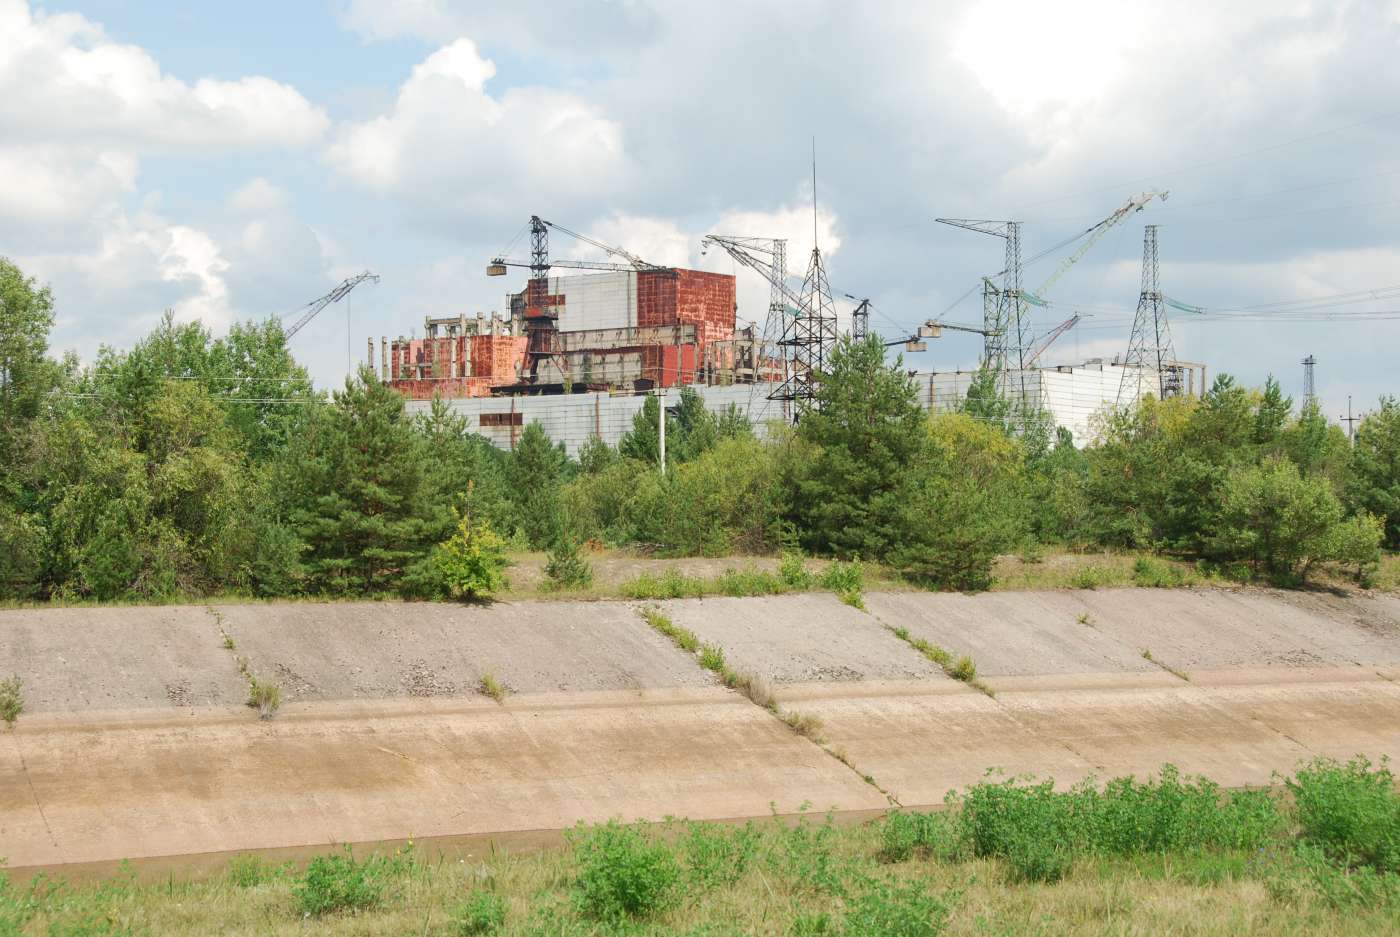 Chernobyl 5th and 6th reactor